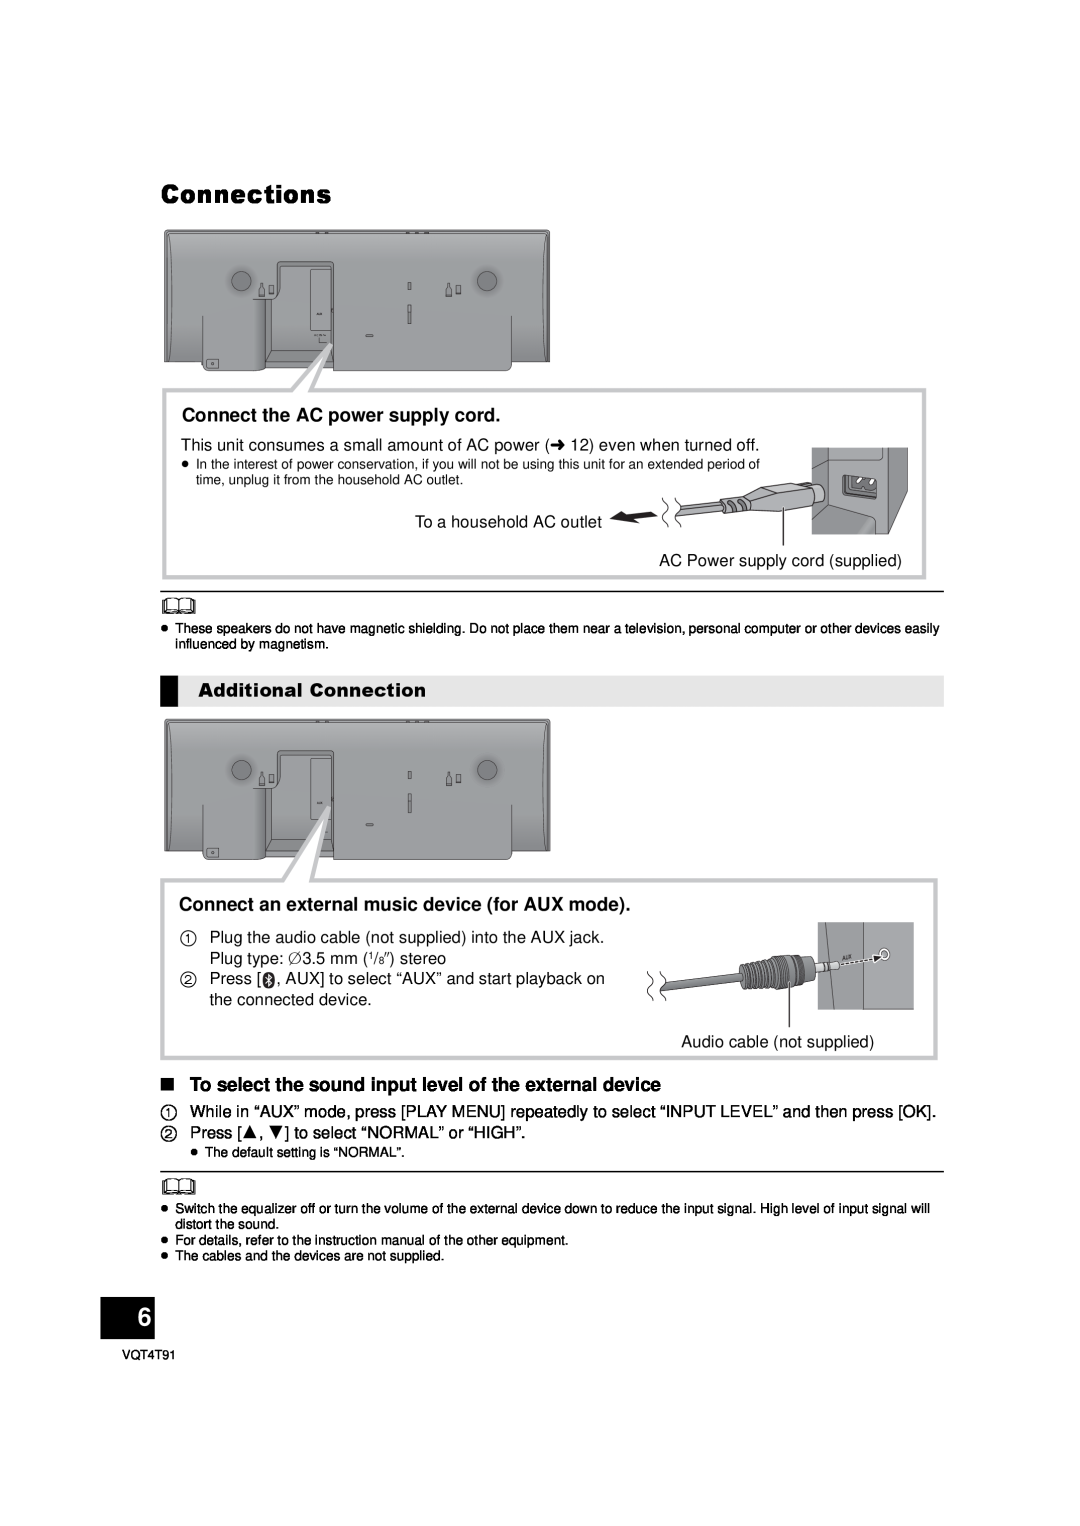 Panasonic SC-NE1 owner manual Connections, Connect the AC power supply cord, Additional Connection 